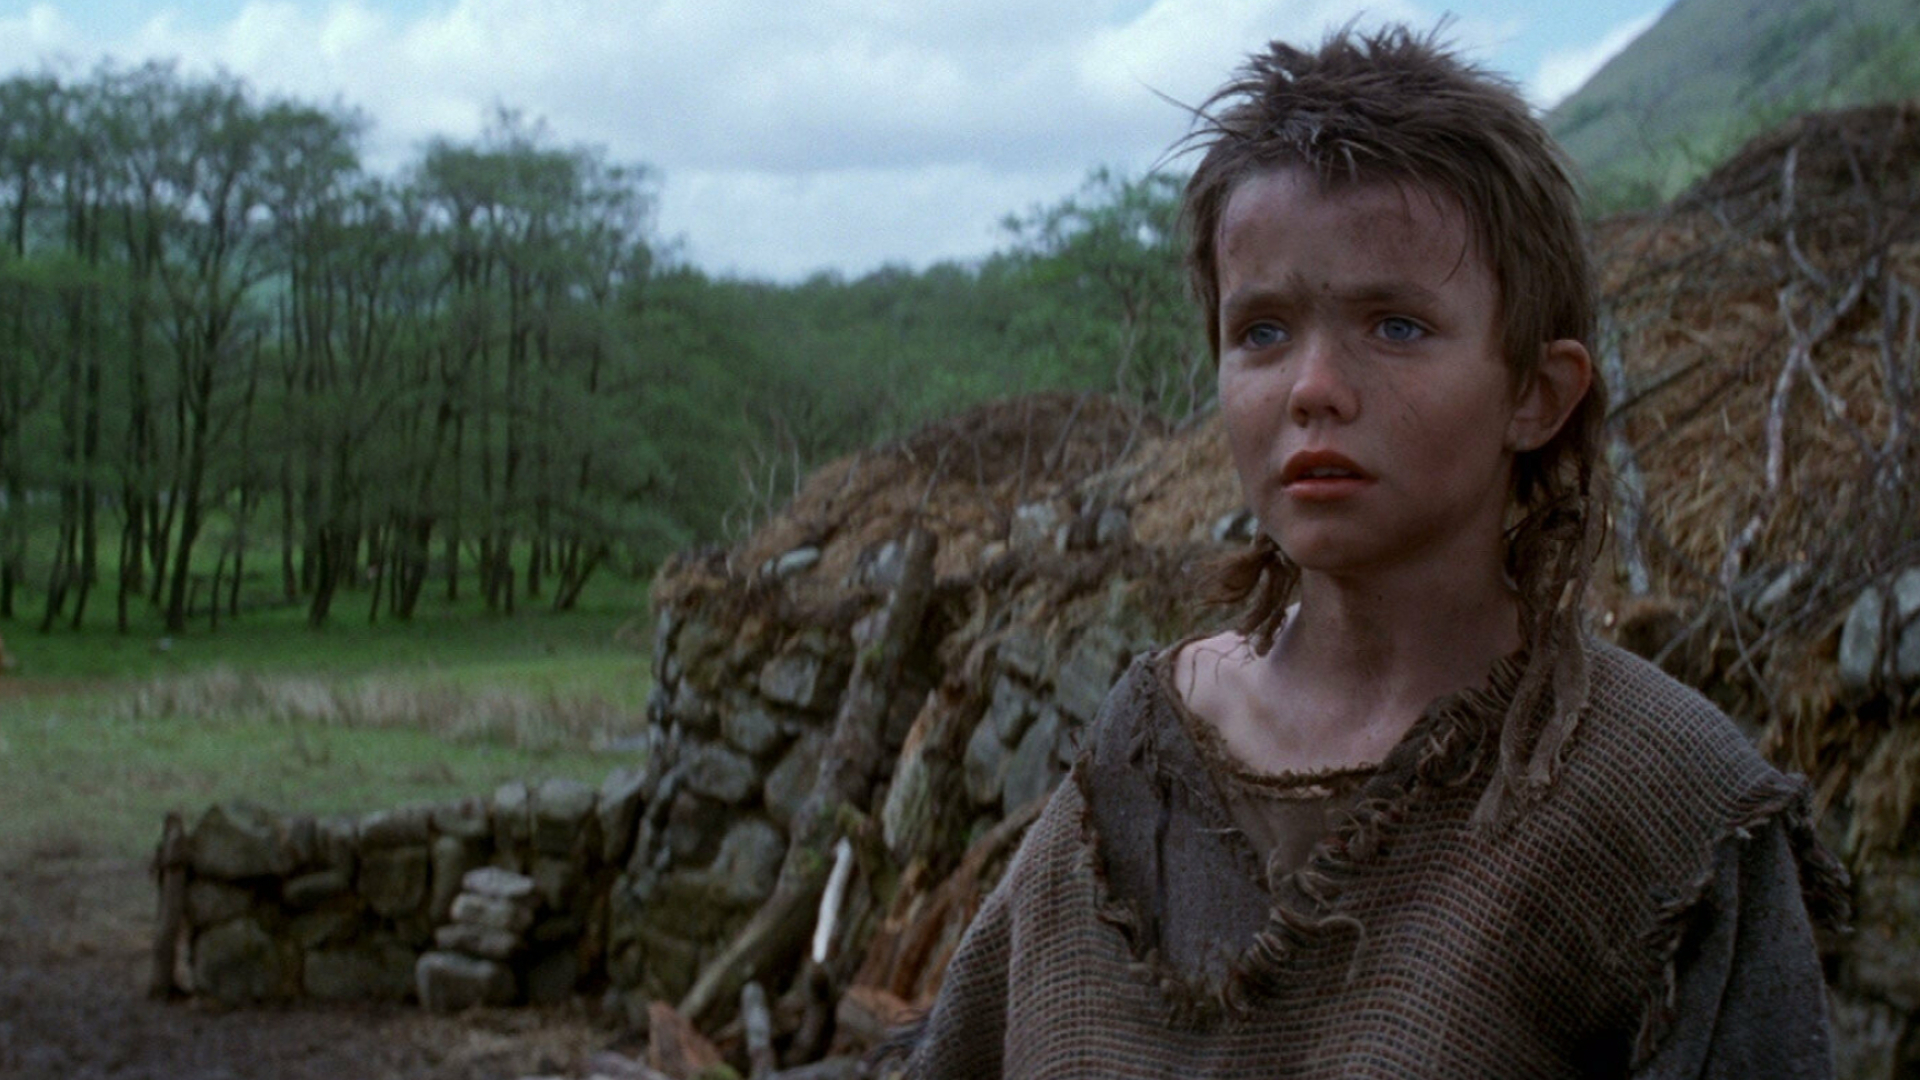 Braveheart: James Robinson as young William Wallace, 1995 movie. 1920x1080 Full HD Background.